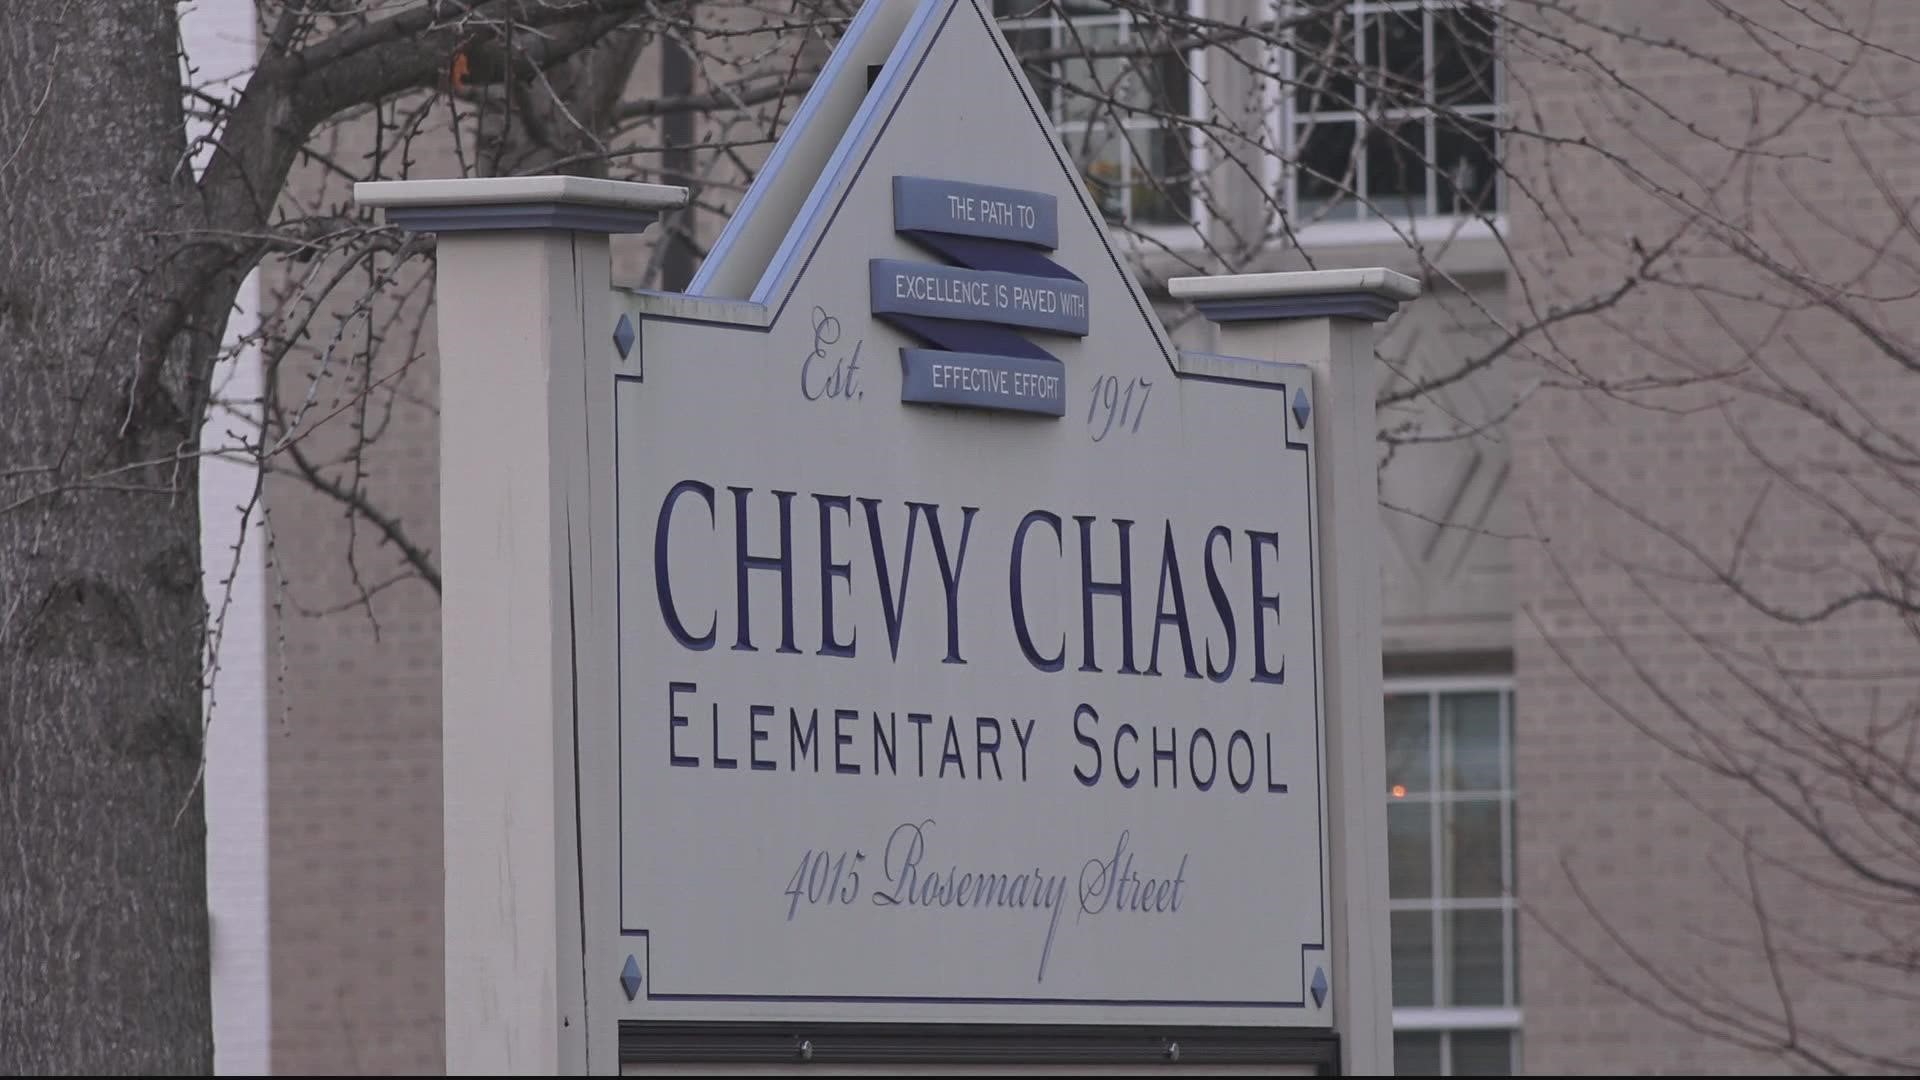 The principal at Chevy Chase Elementary School informed parents of the two incidents in a letter sent out Wednesday.